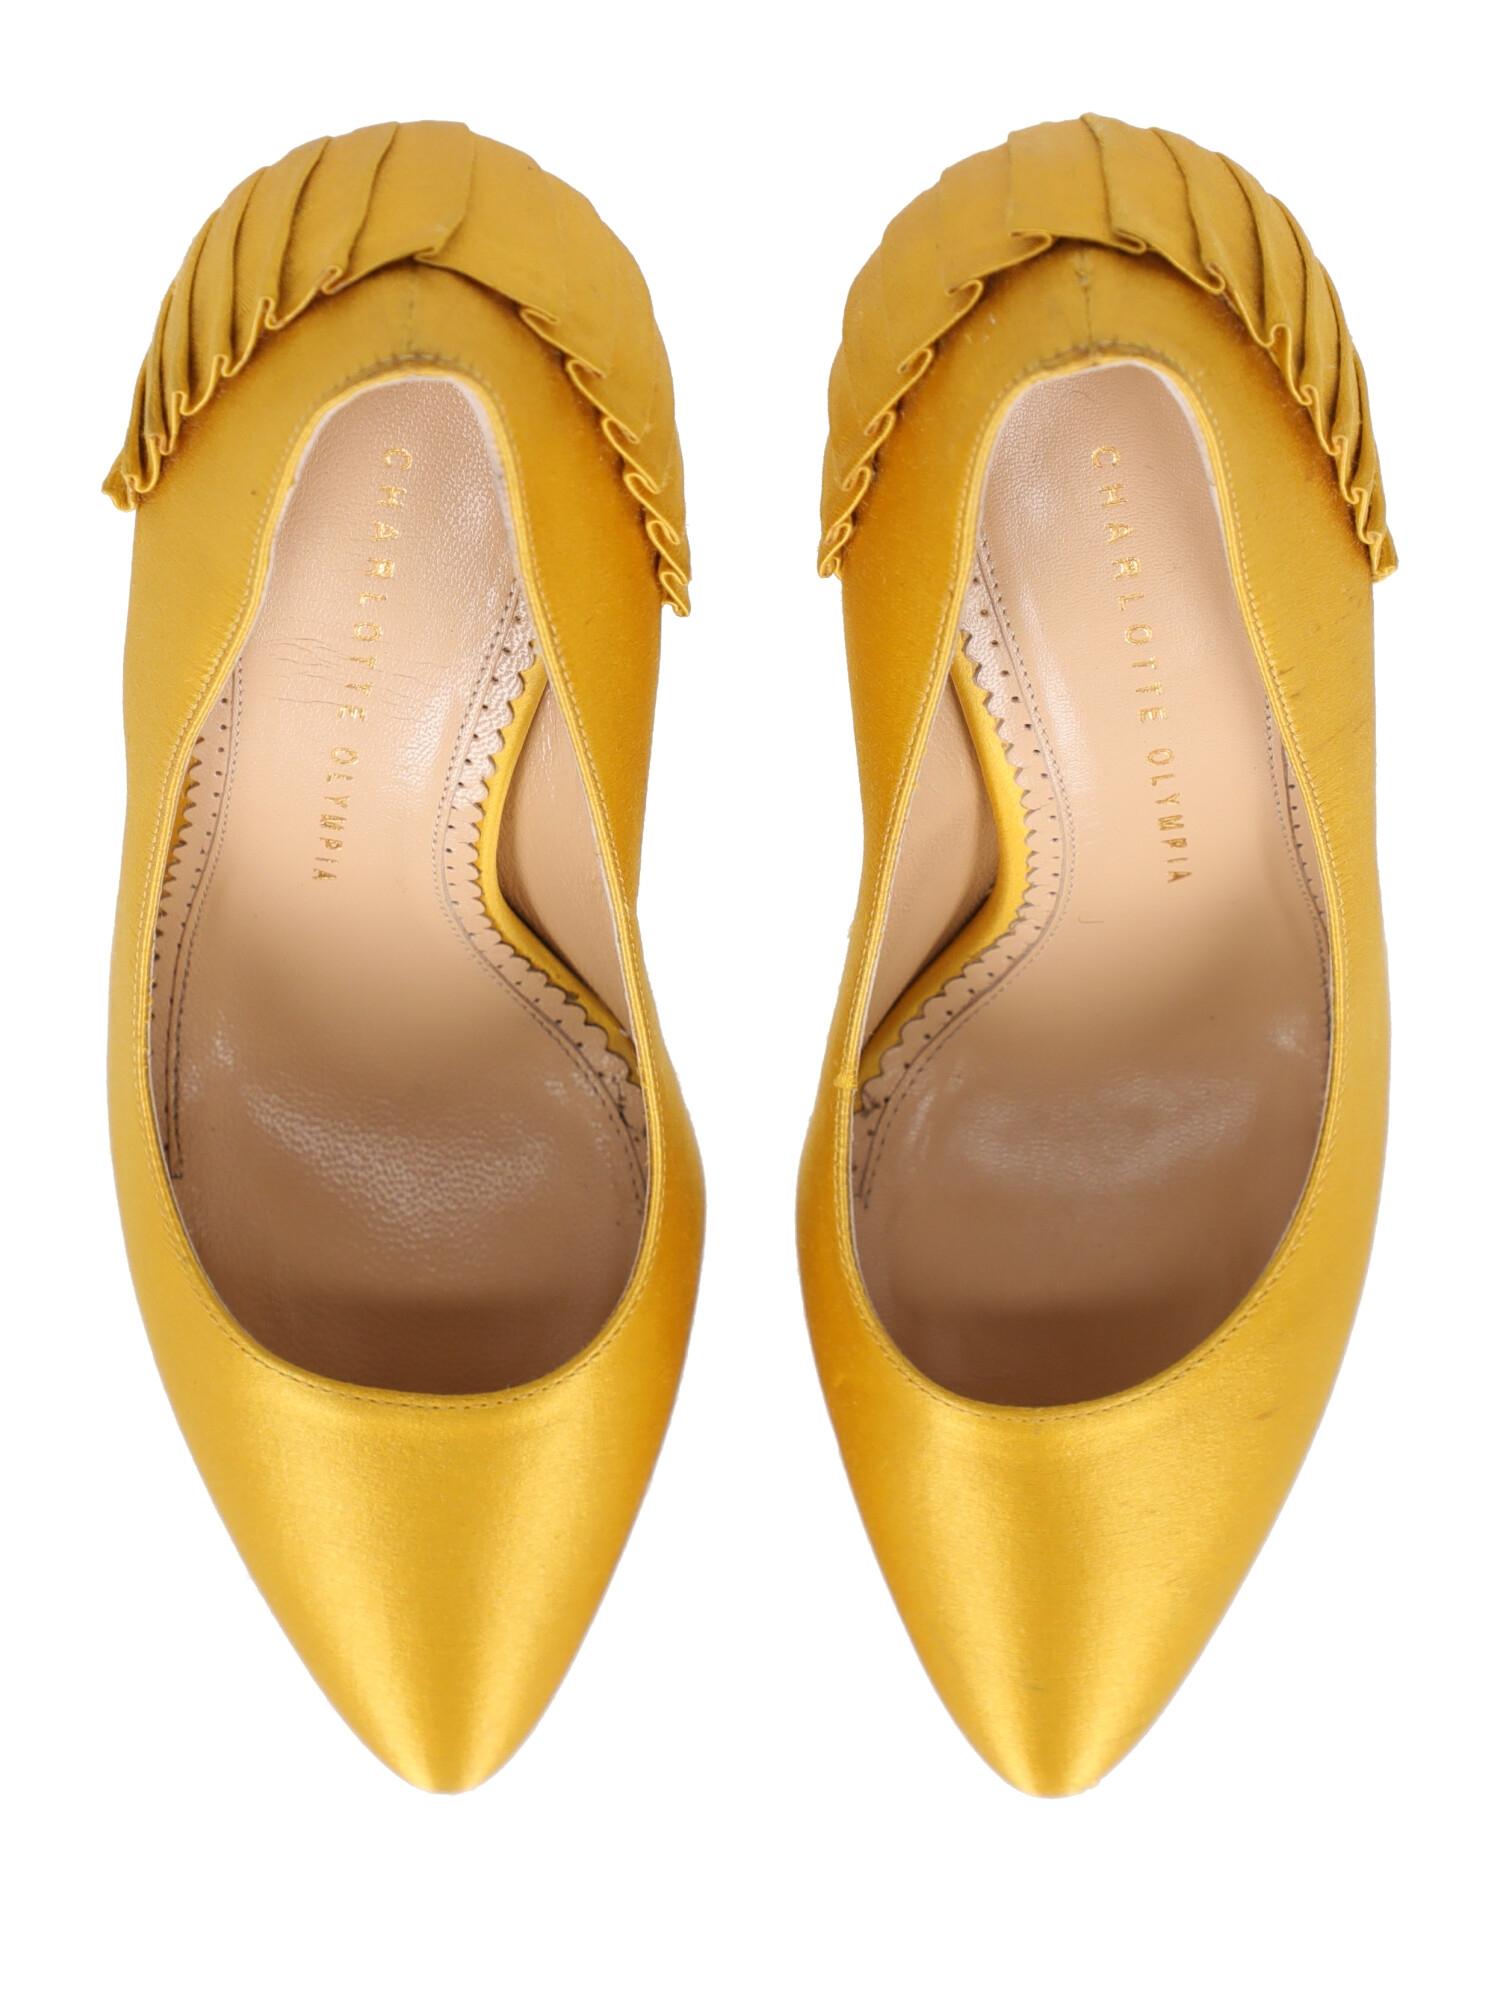 Charlotte Olympia Woman Pumps Yellow Fabric IT 36 For Sale 2